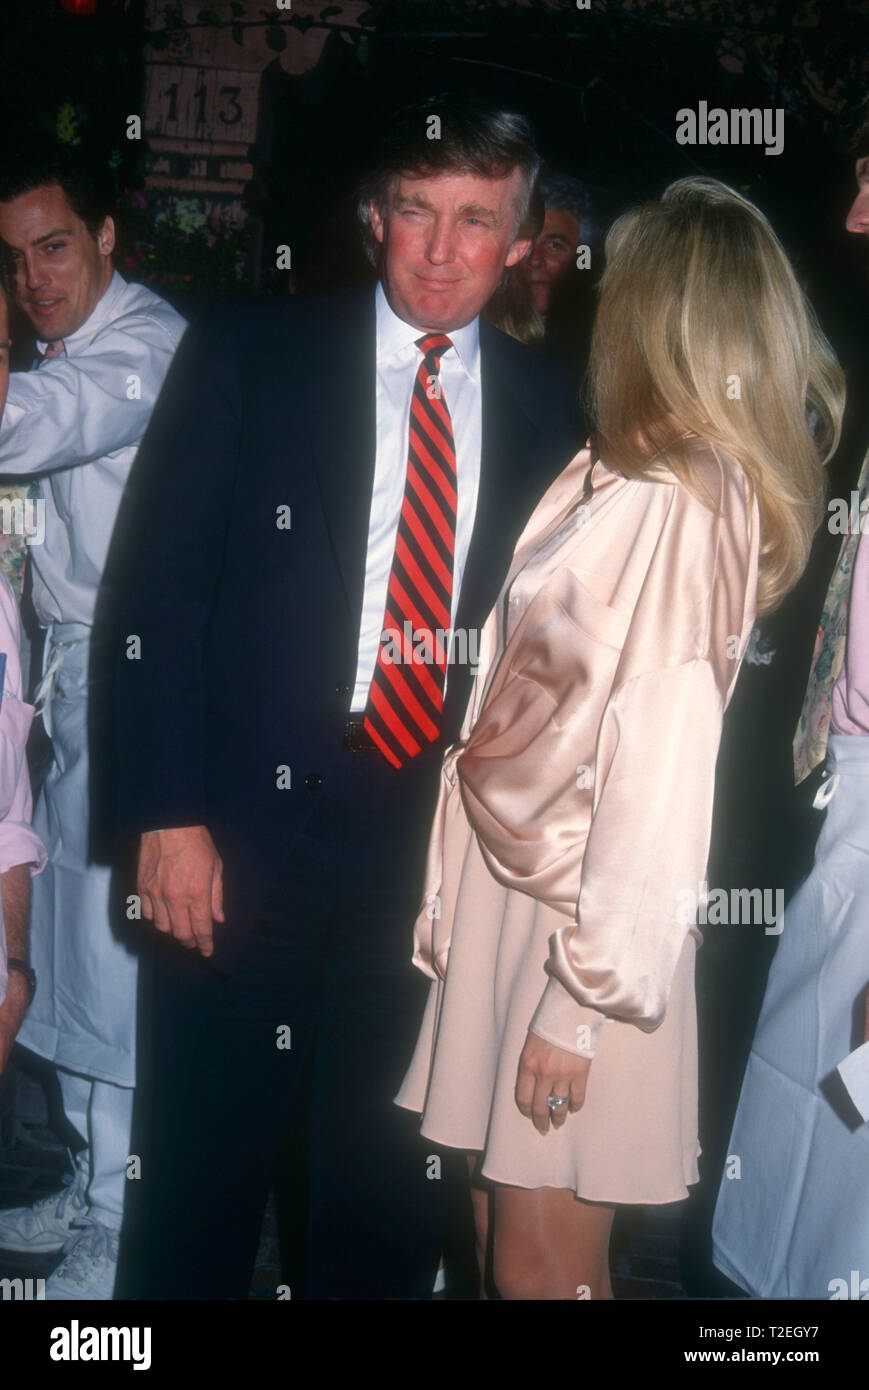 LOS ANGELES, CA - MARCH 12: Donald Trump and wife actress Marla Maples on March 12, 1994 at The Ivy Restaurant in Los Angeles, California. Photo by Barry King/Alamy Stock Photo Stock Photo